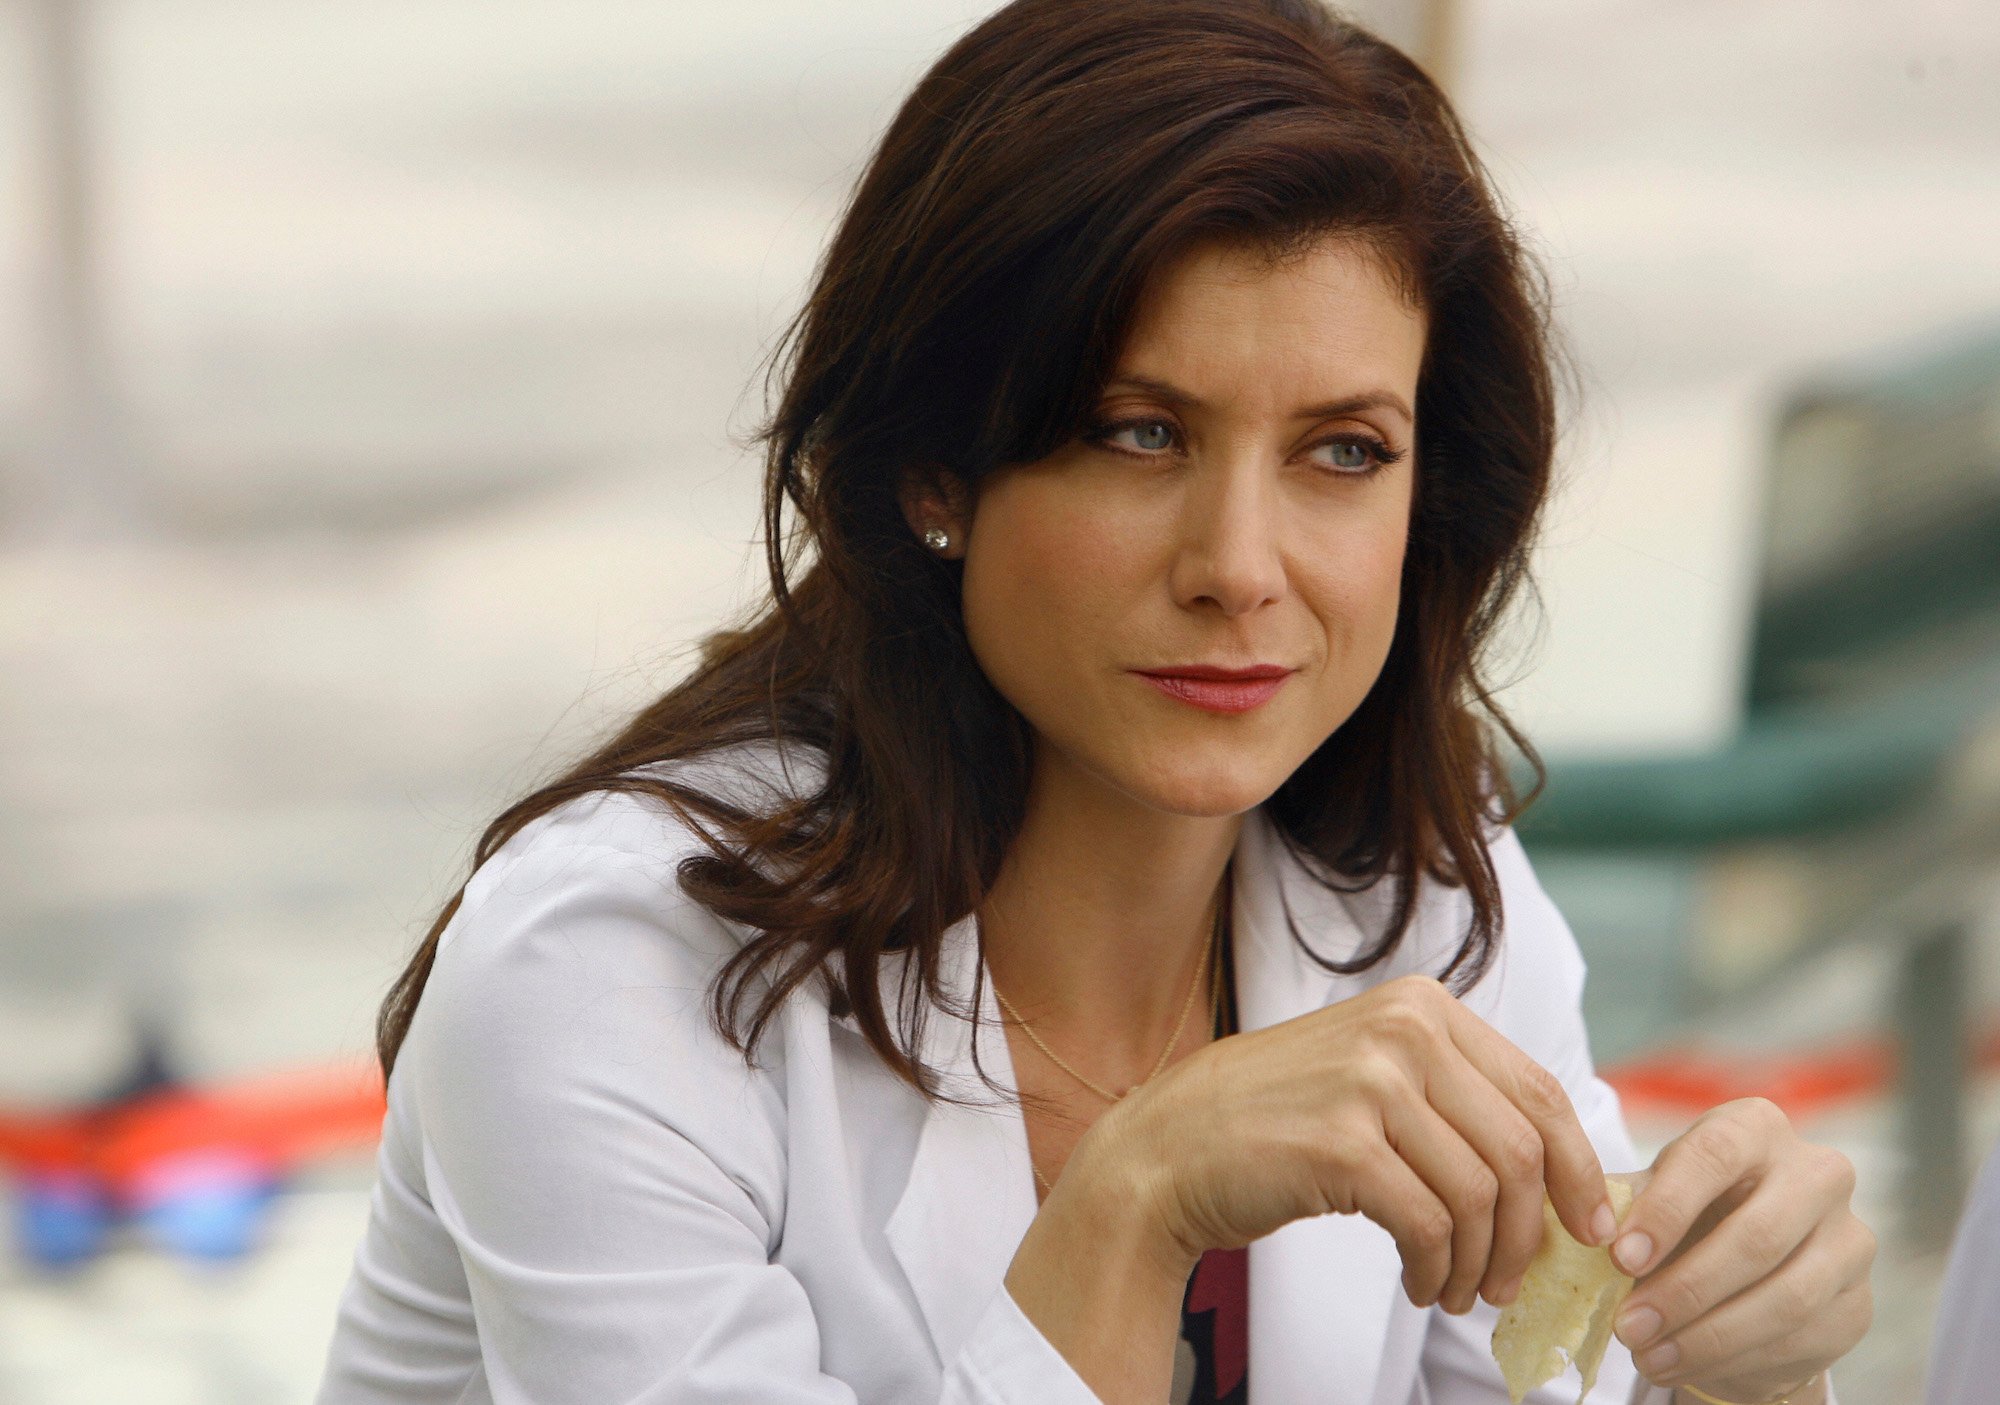 Kate Walsh wearing a white lab coat in 'Grey's Anatomy.'